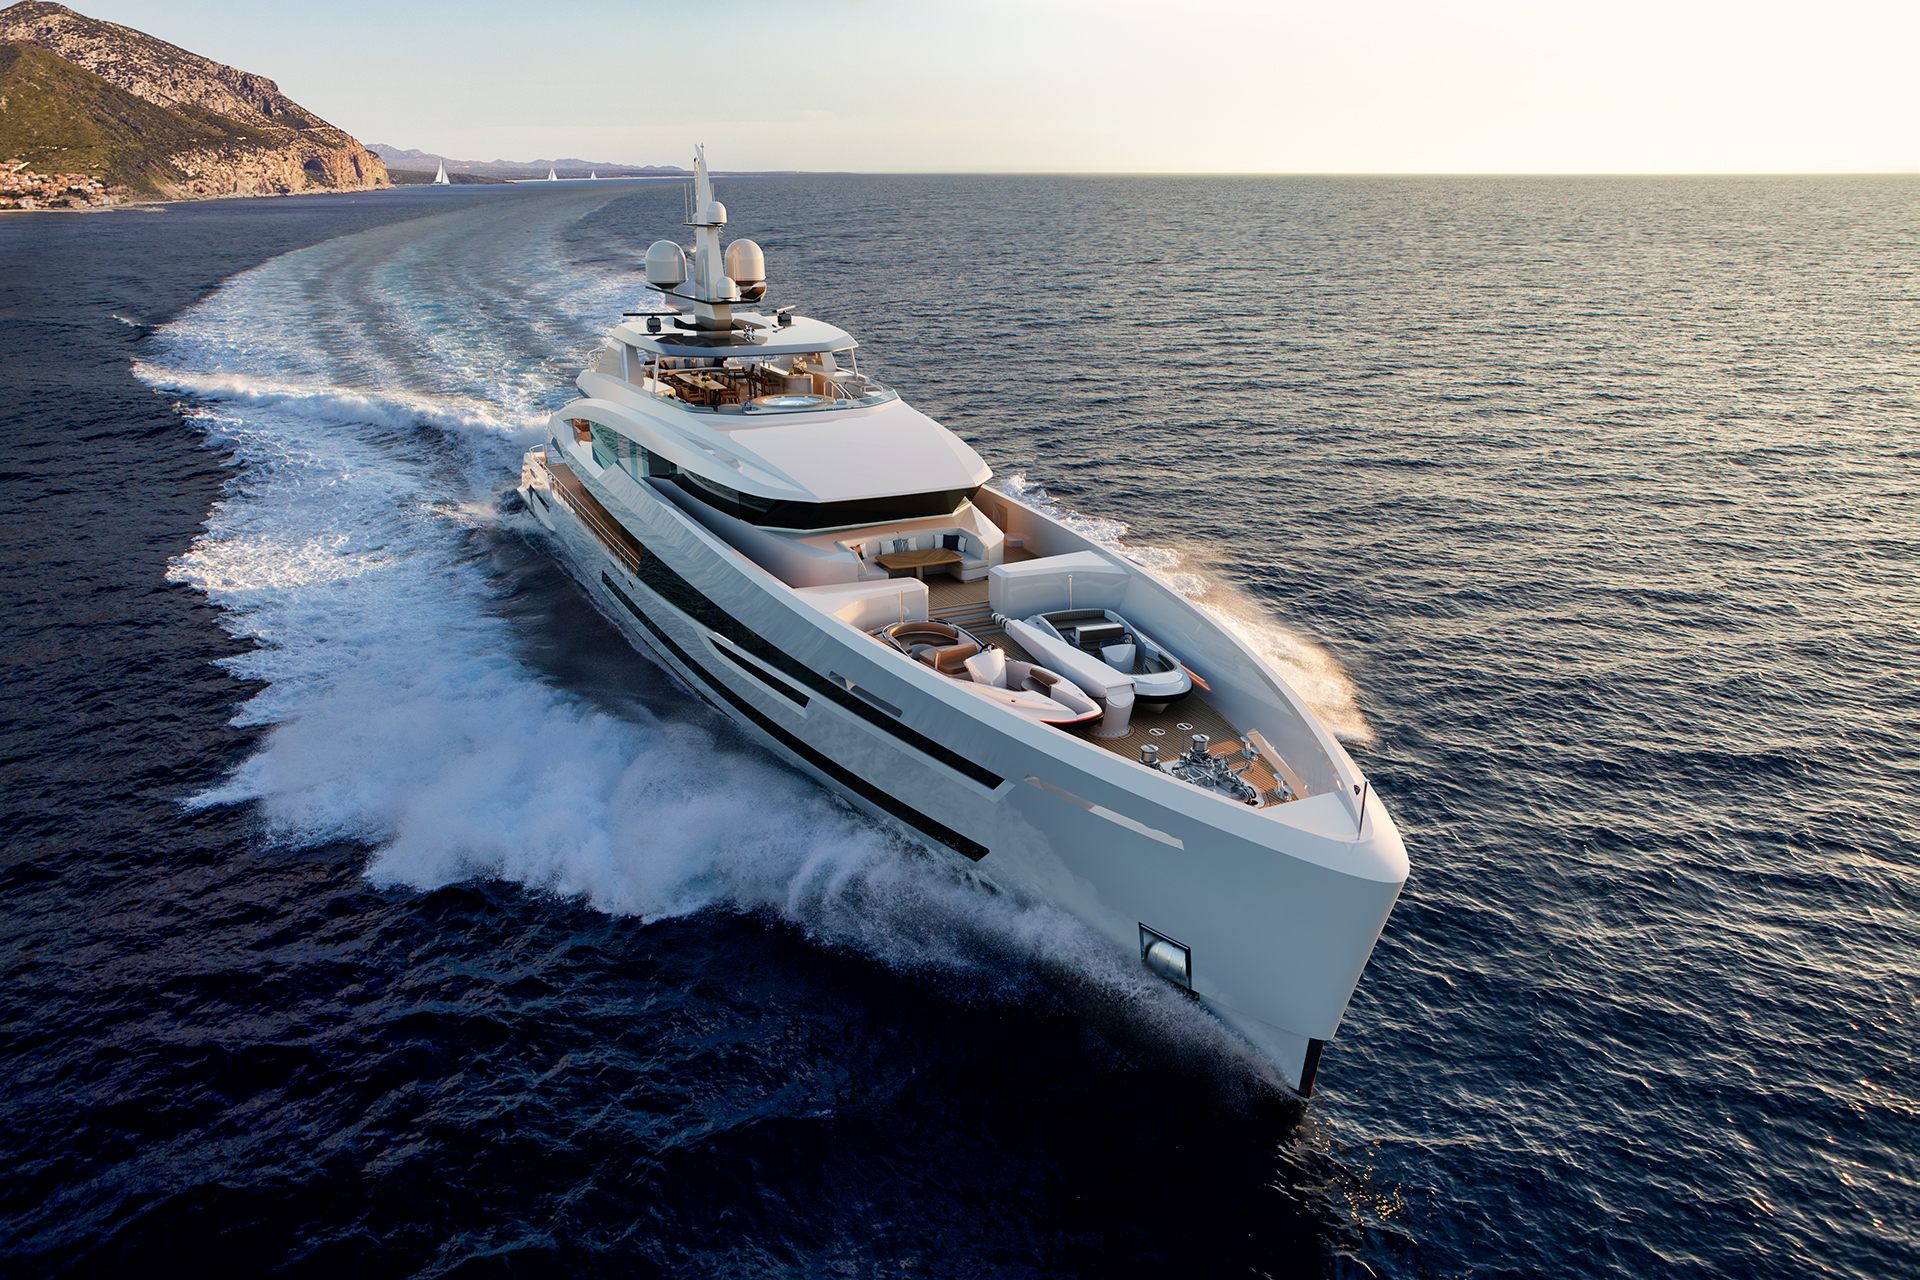 Building the dream: Construction of the 57m Heesen superyacht Project Akira